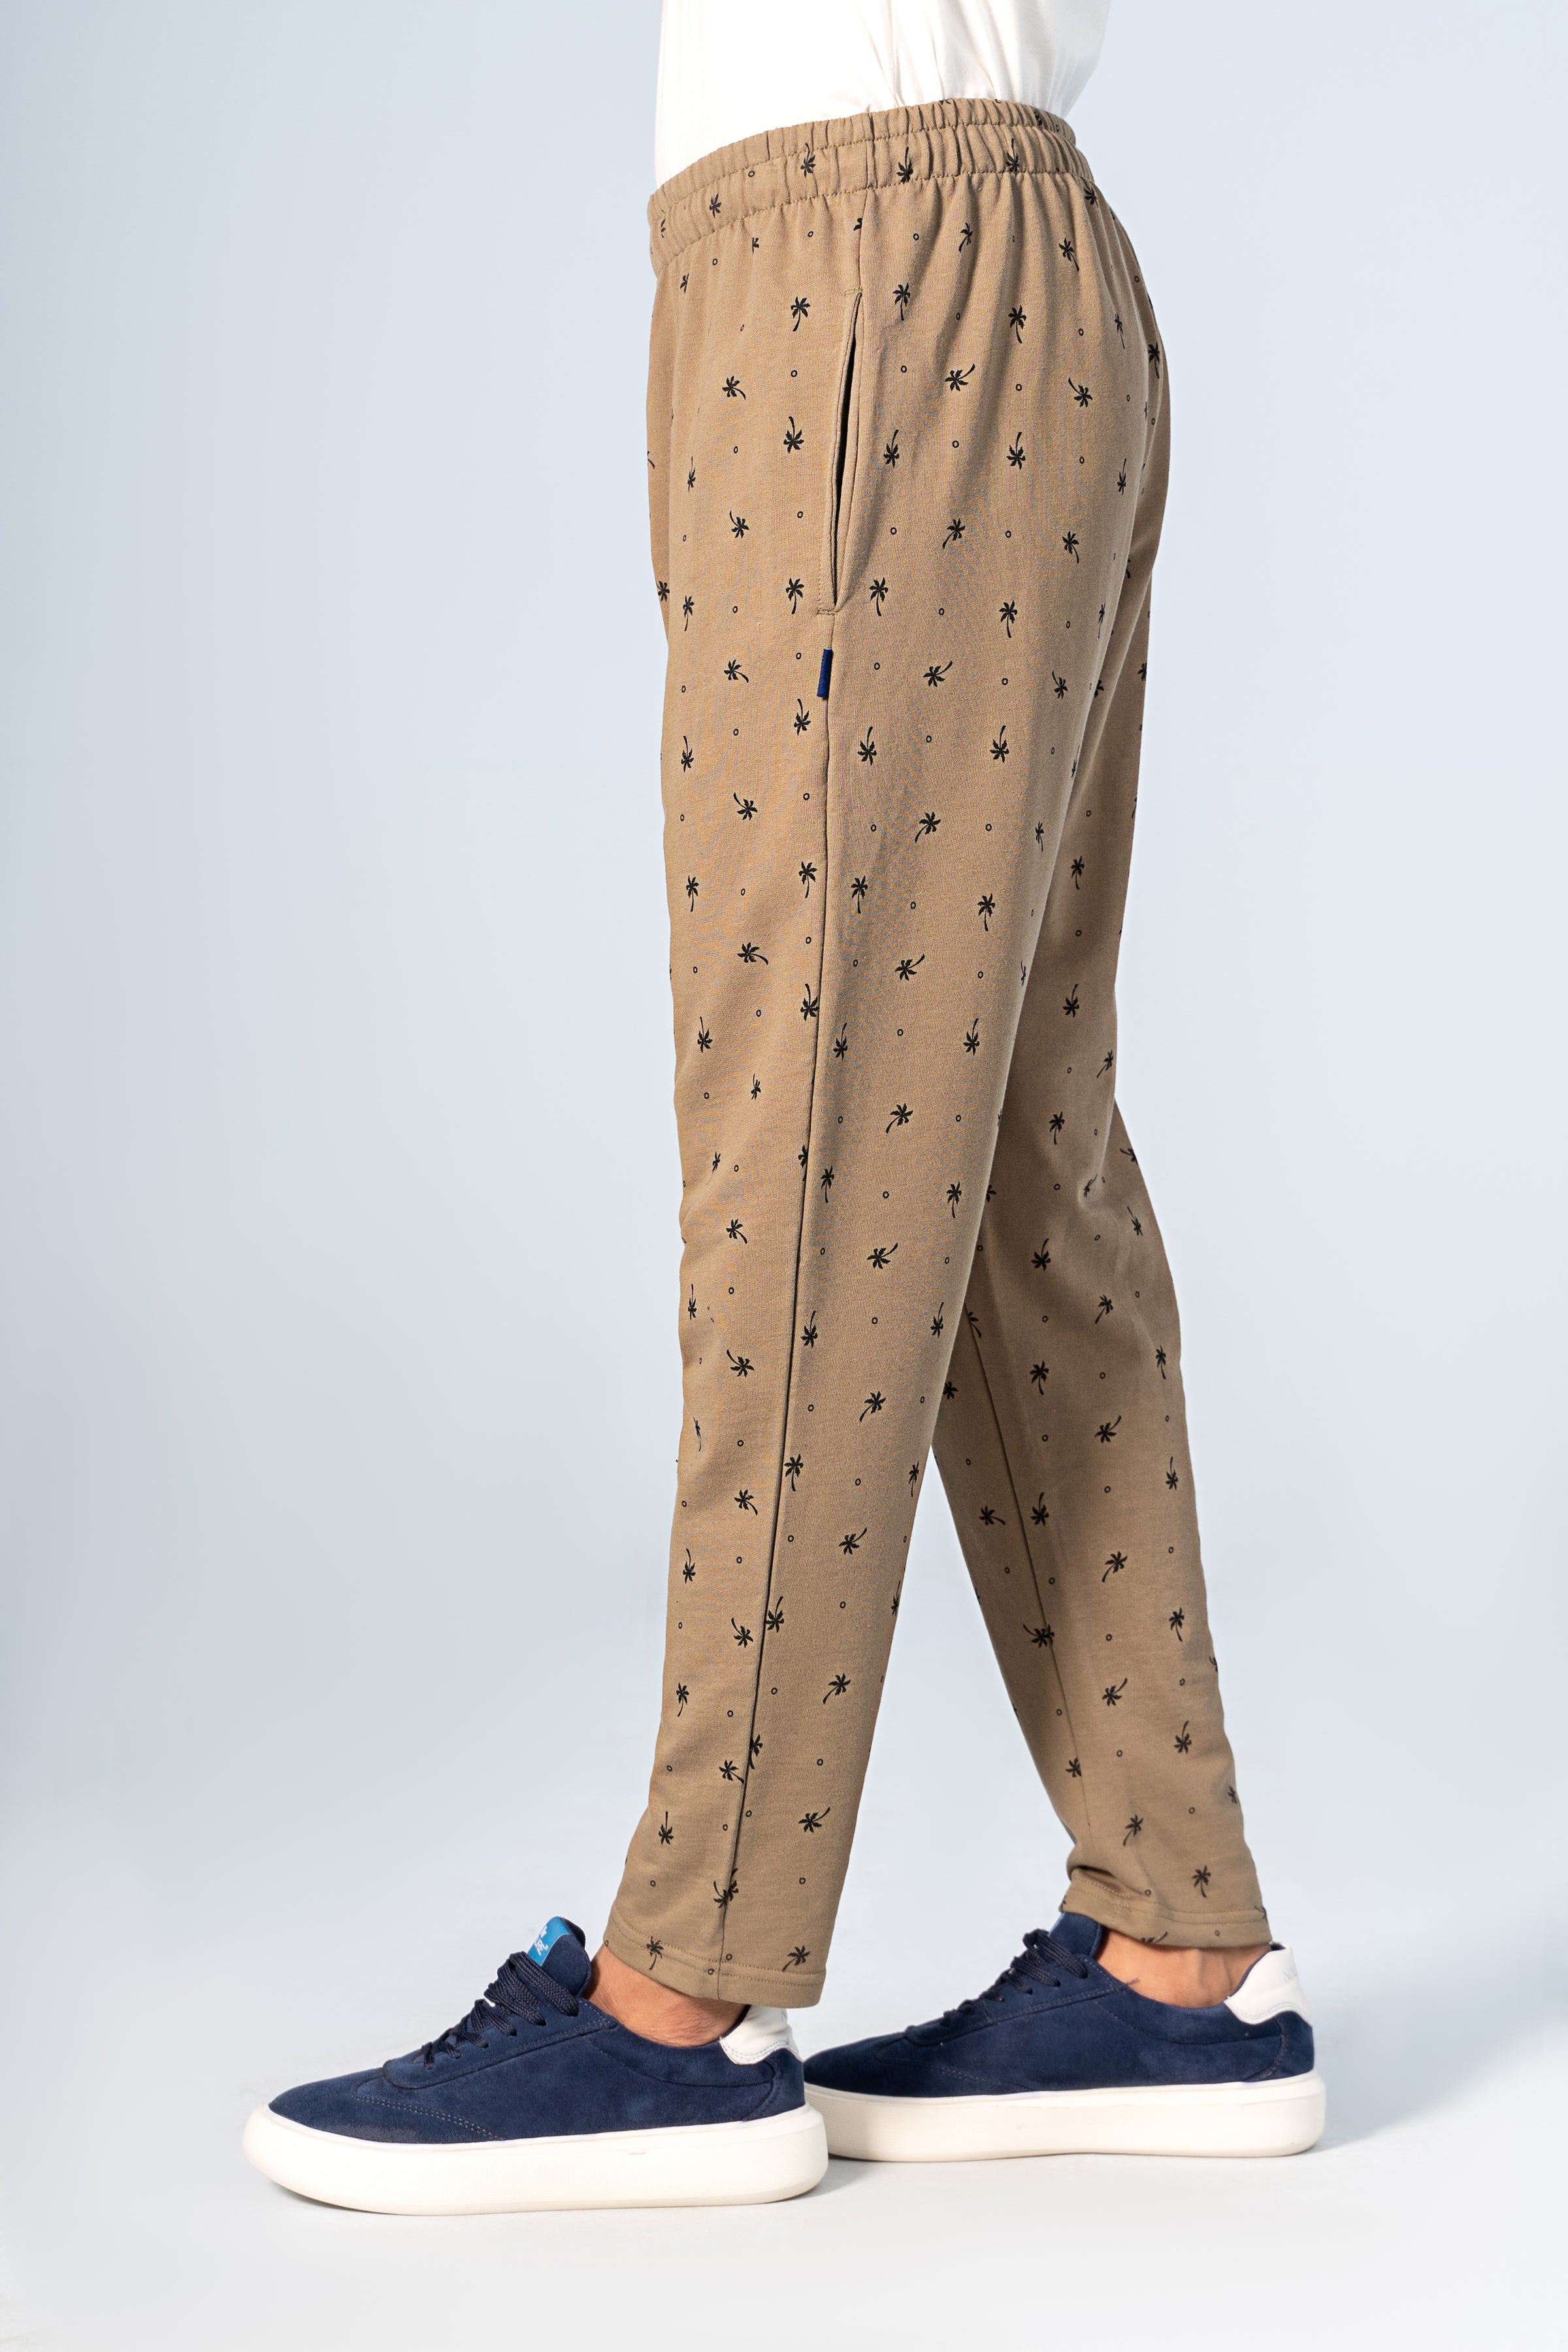 SLEEPWEAR TROUSER OLIVE PRINTED - Charcoal Clothing